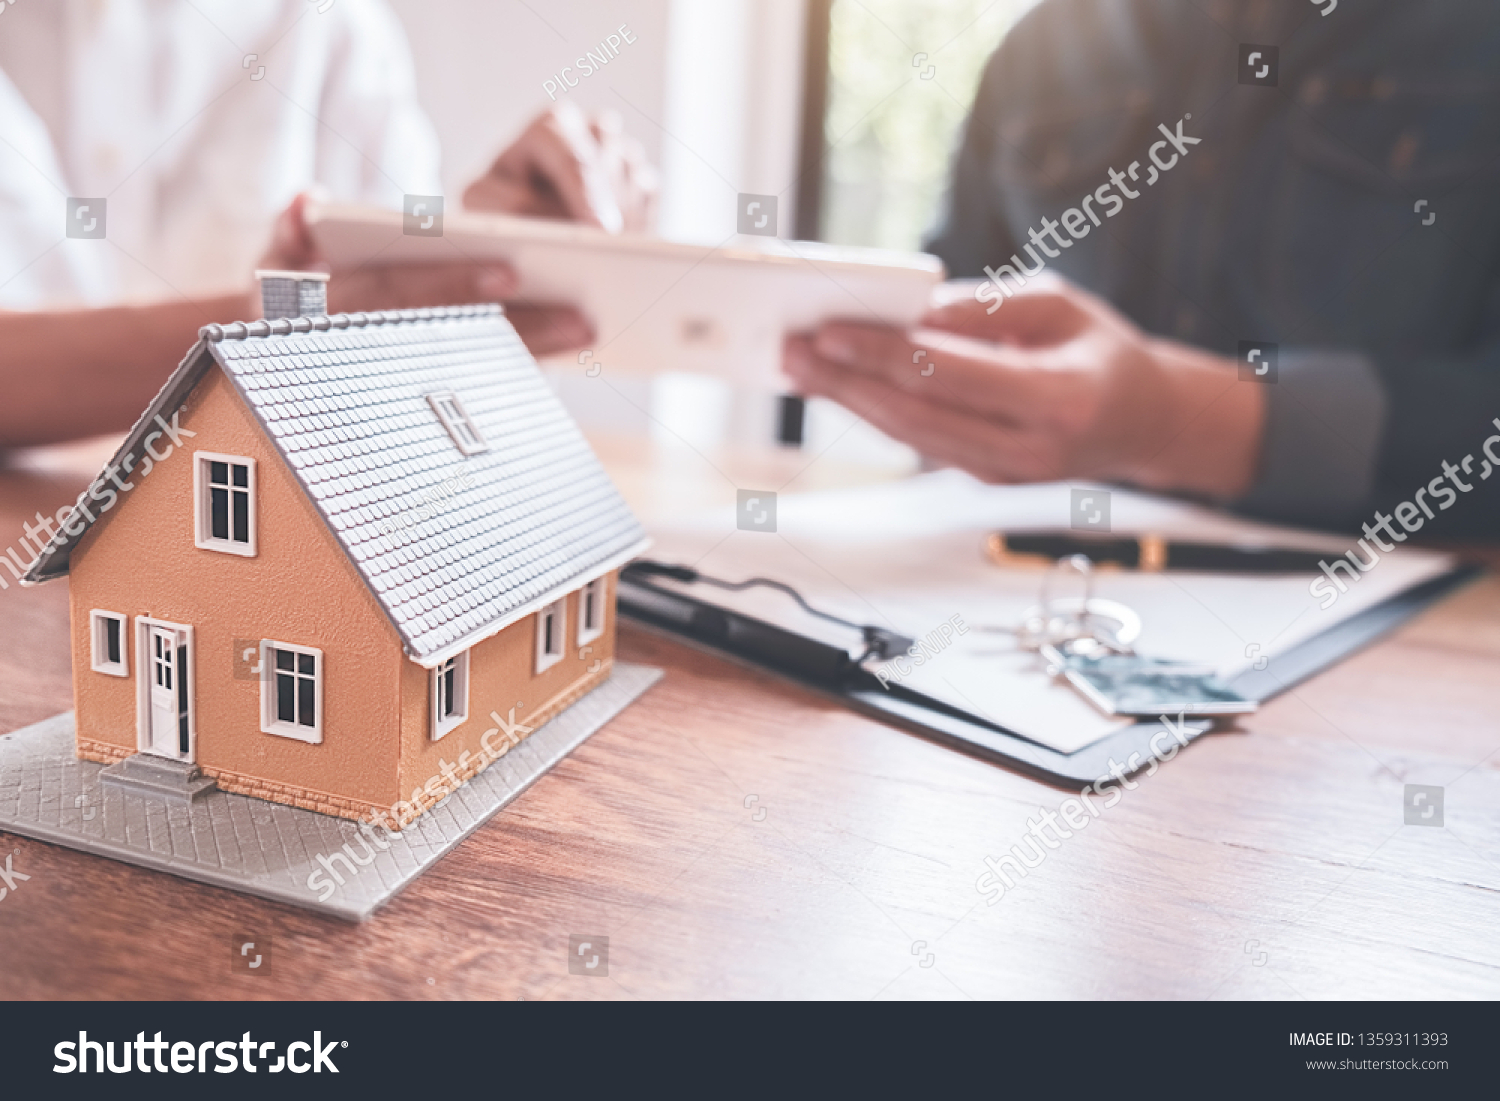 Car and House model with agent and customer discussing for contract to buy, get insurance or loan real estate or property background. #1359311393